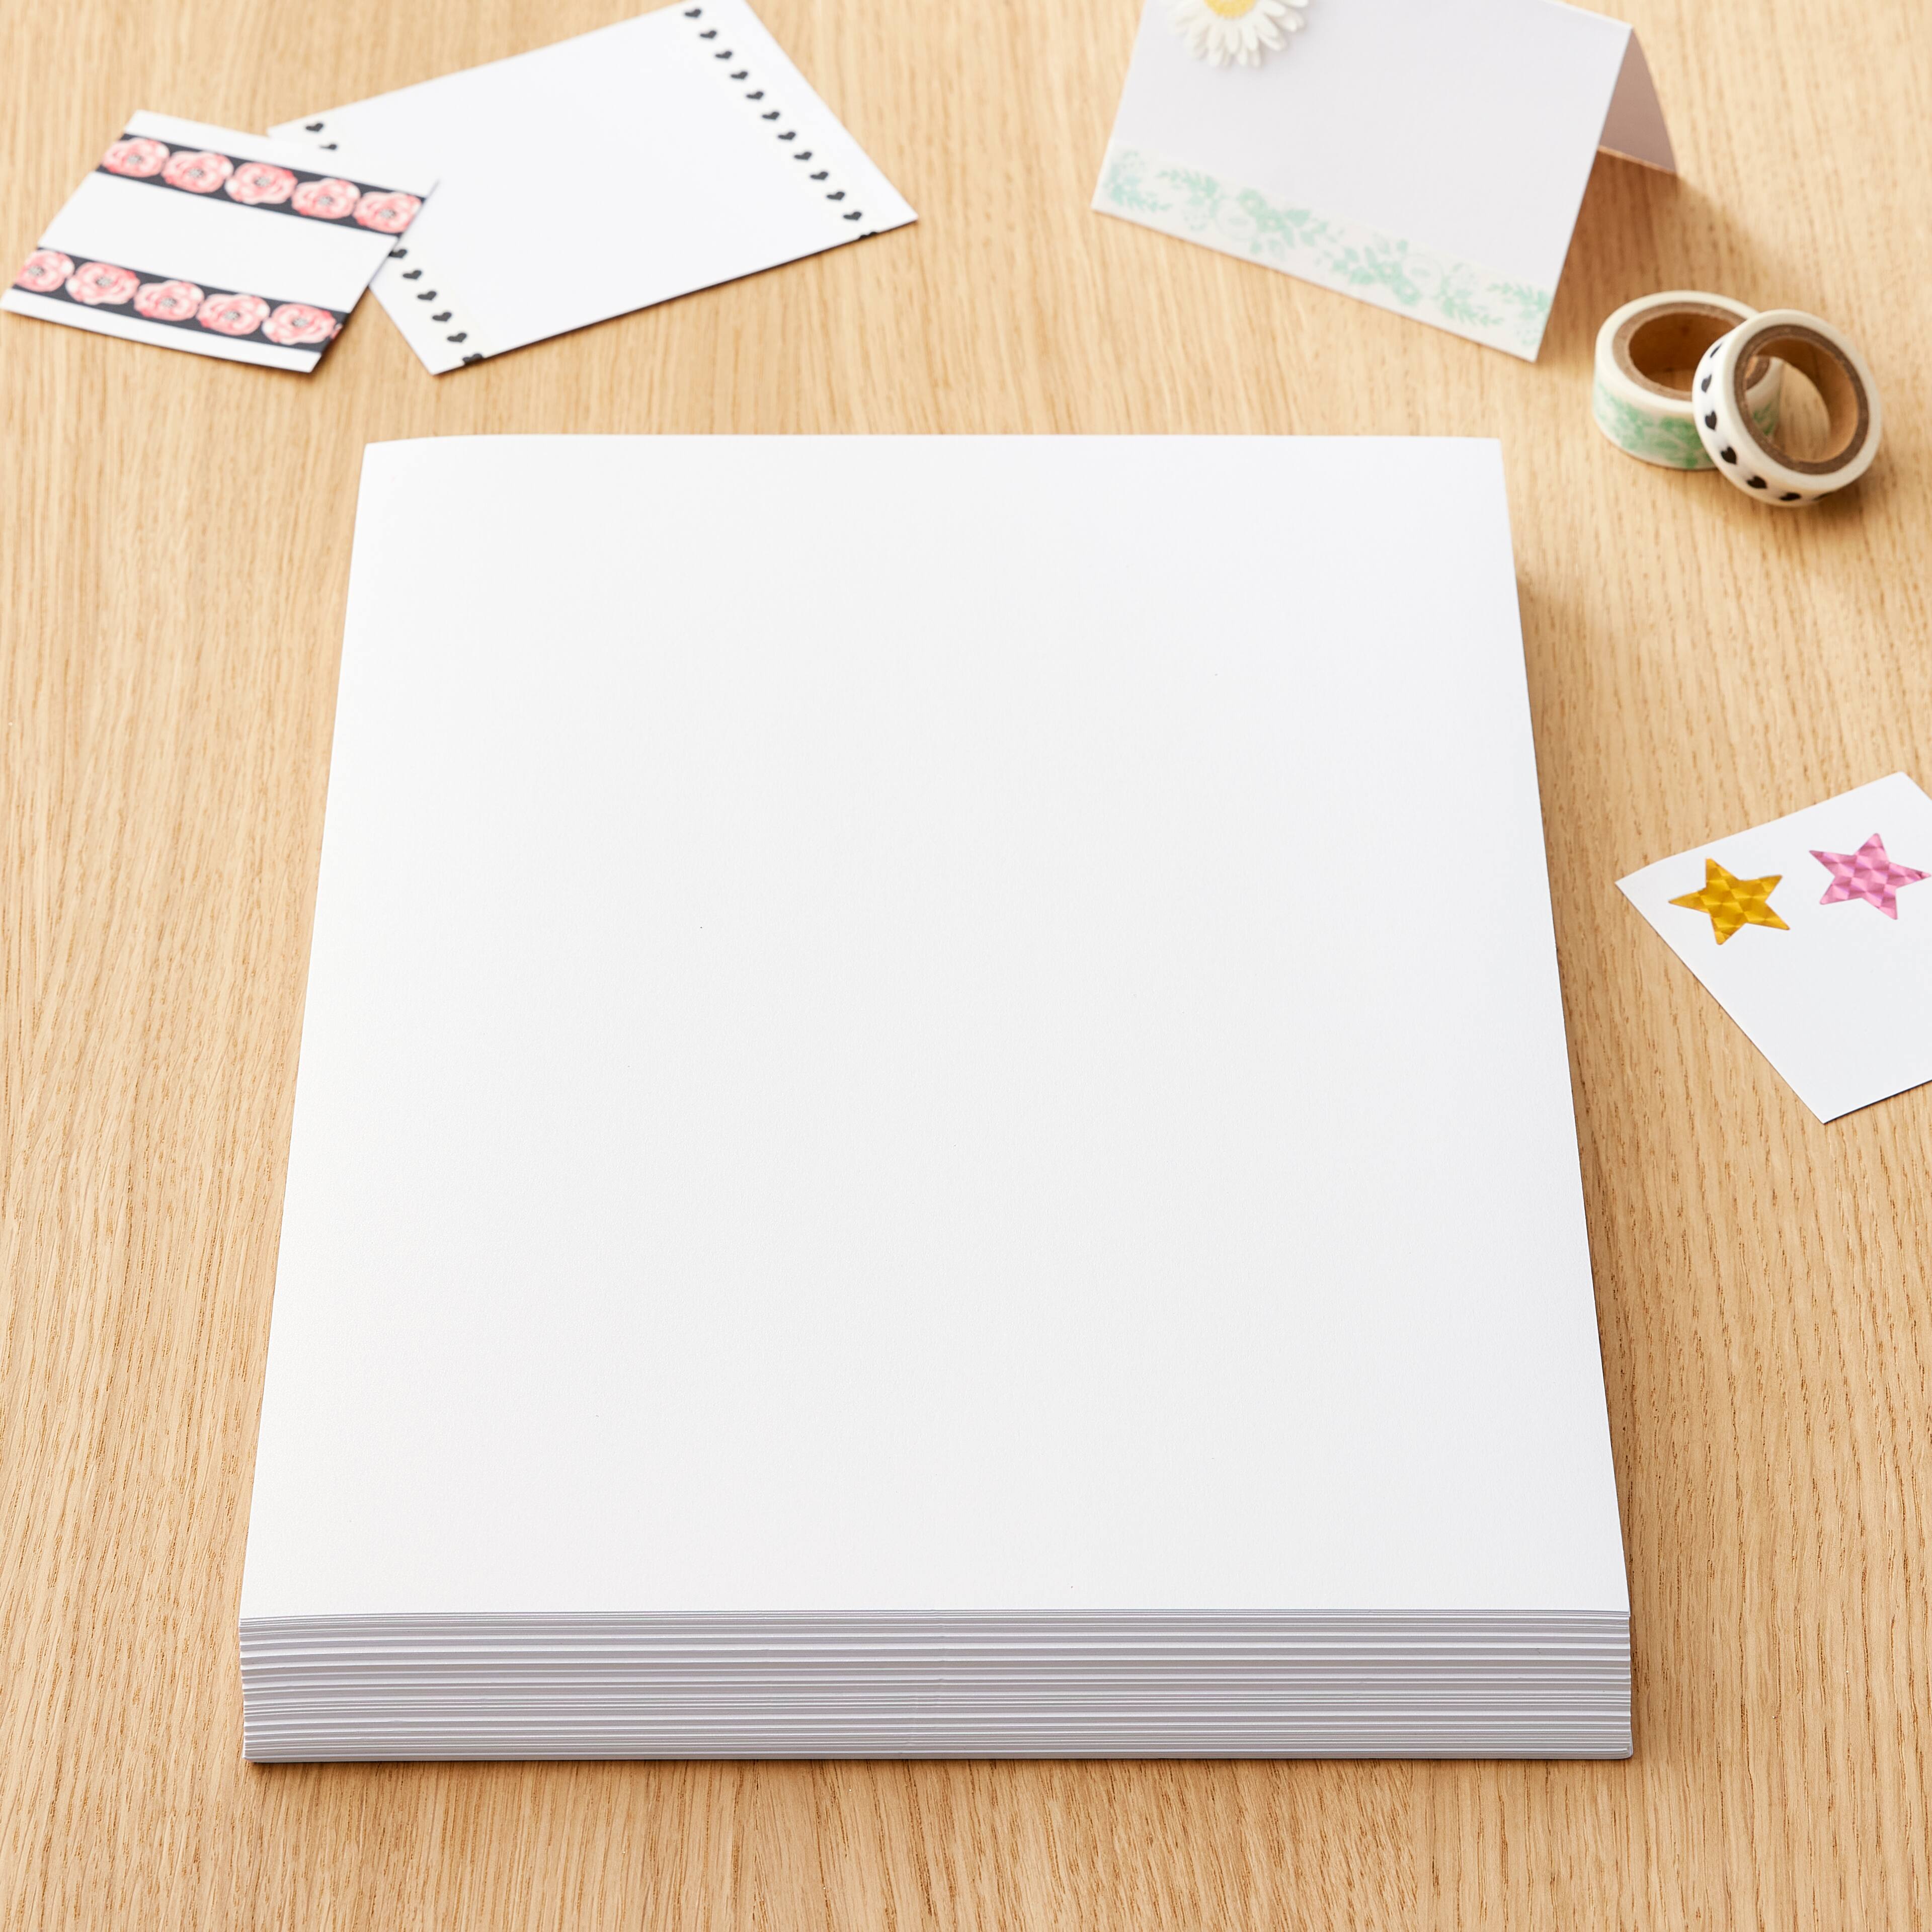 12 Packs: 100 ct. (1,200 total) White Gold 8.5&#x22; x 11&#x22; Shimmer Cardstock Paper by Recollections&#x2122;